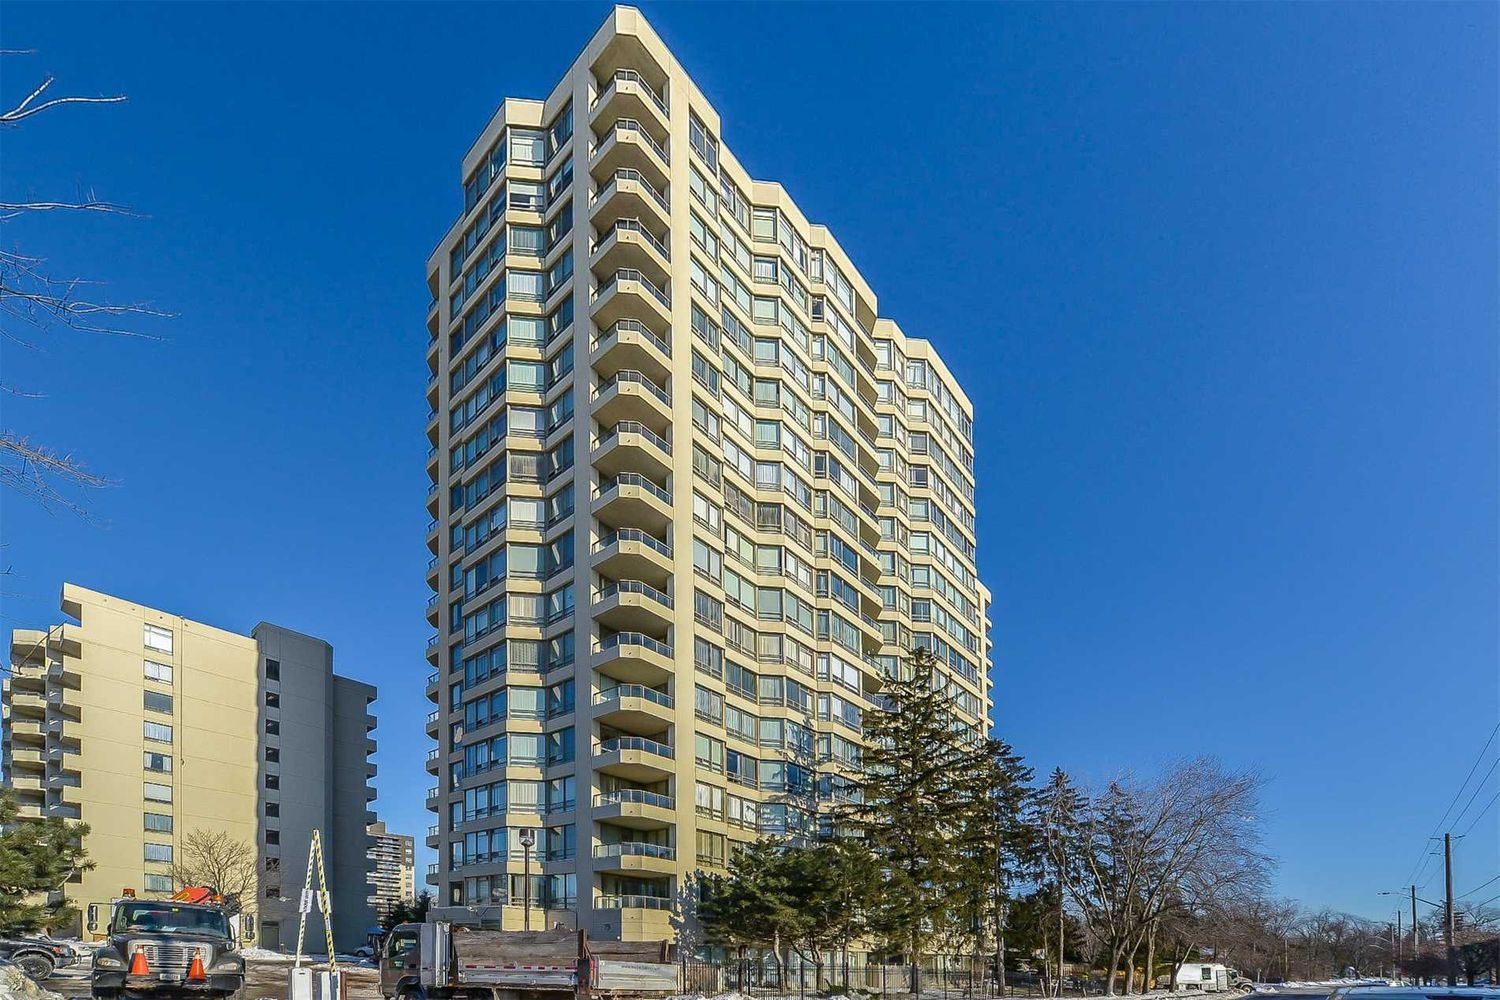 75 King Street E. King Gardens Condos is located in  Mississauga, Toronto - image #1 of 2